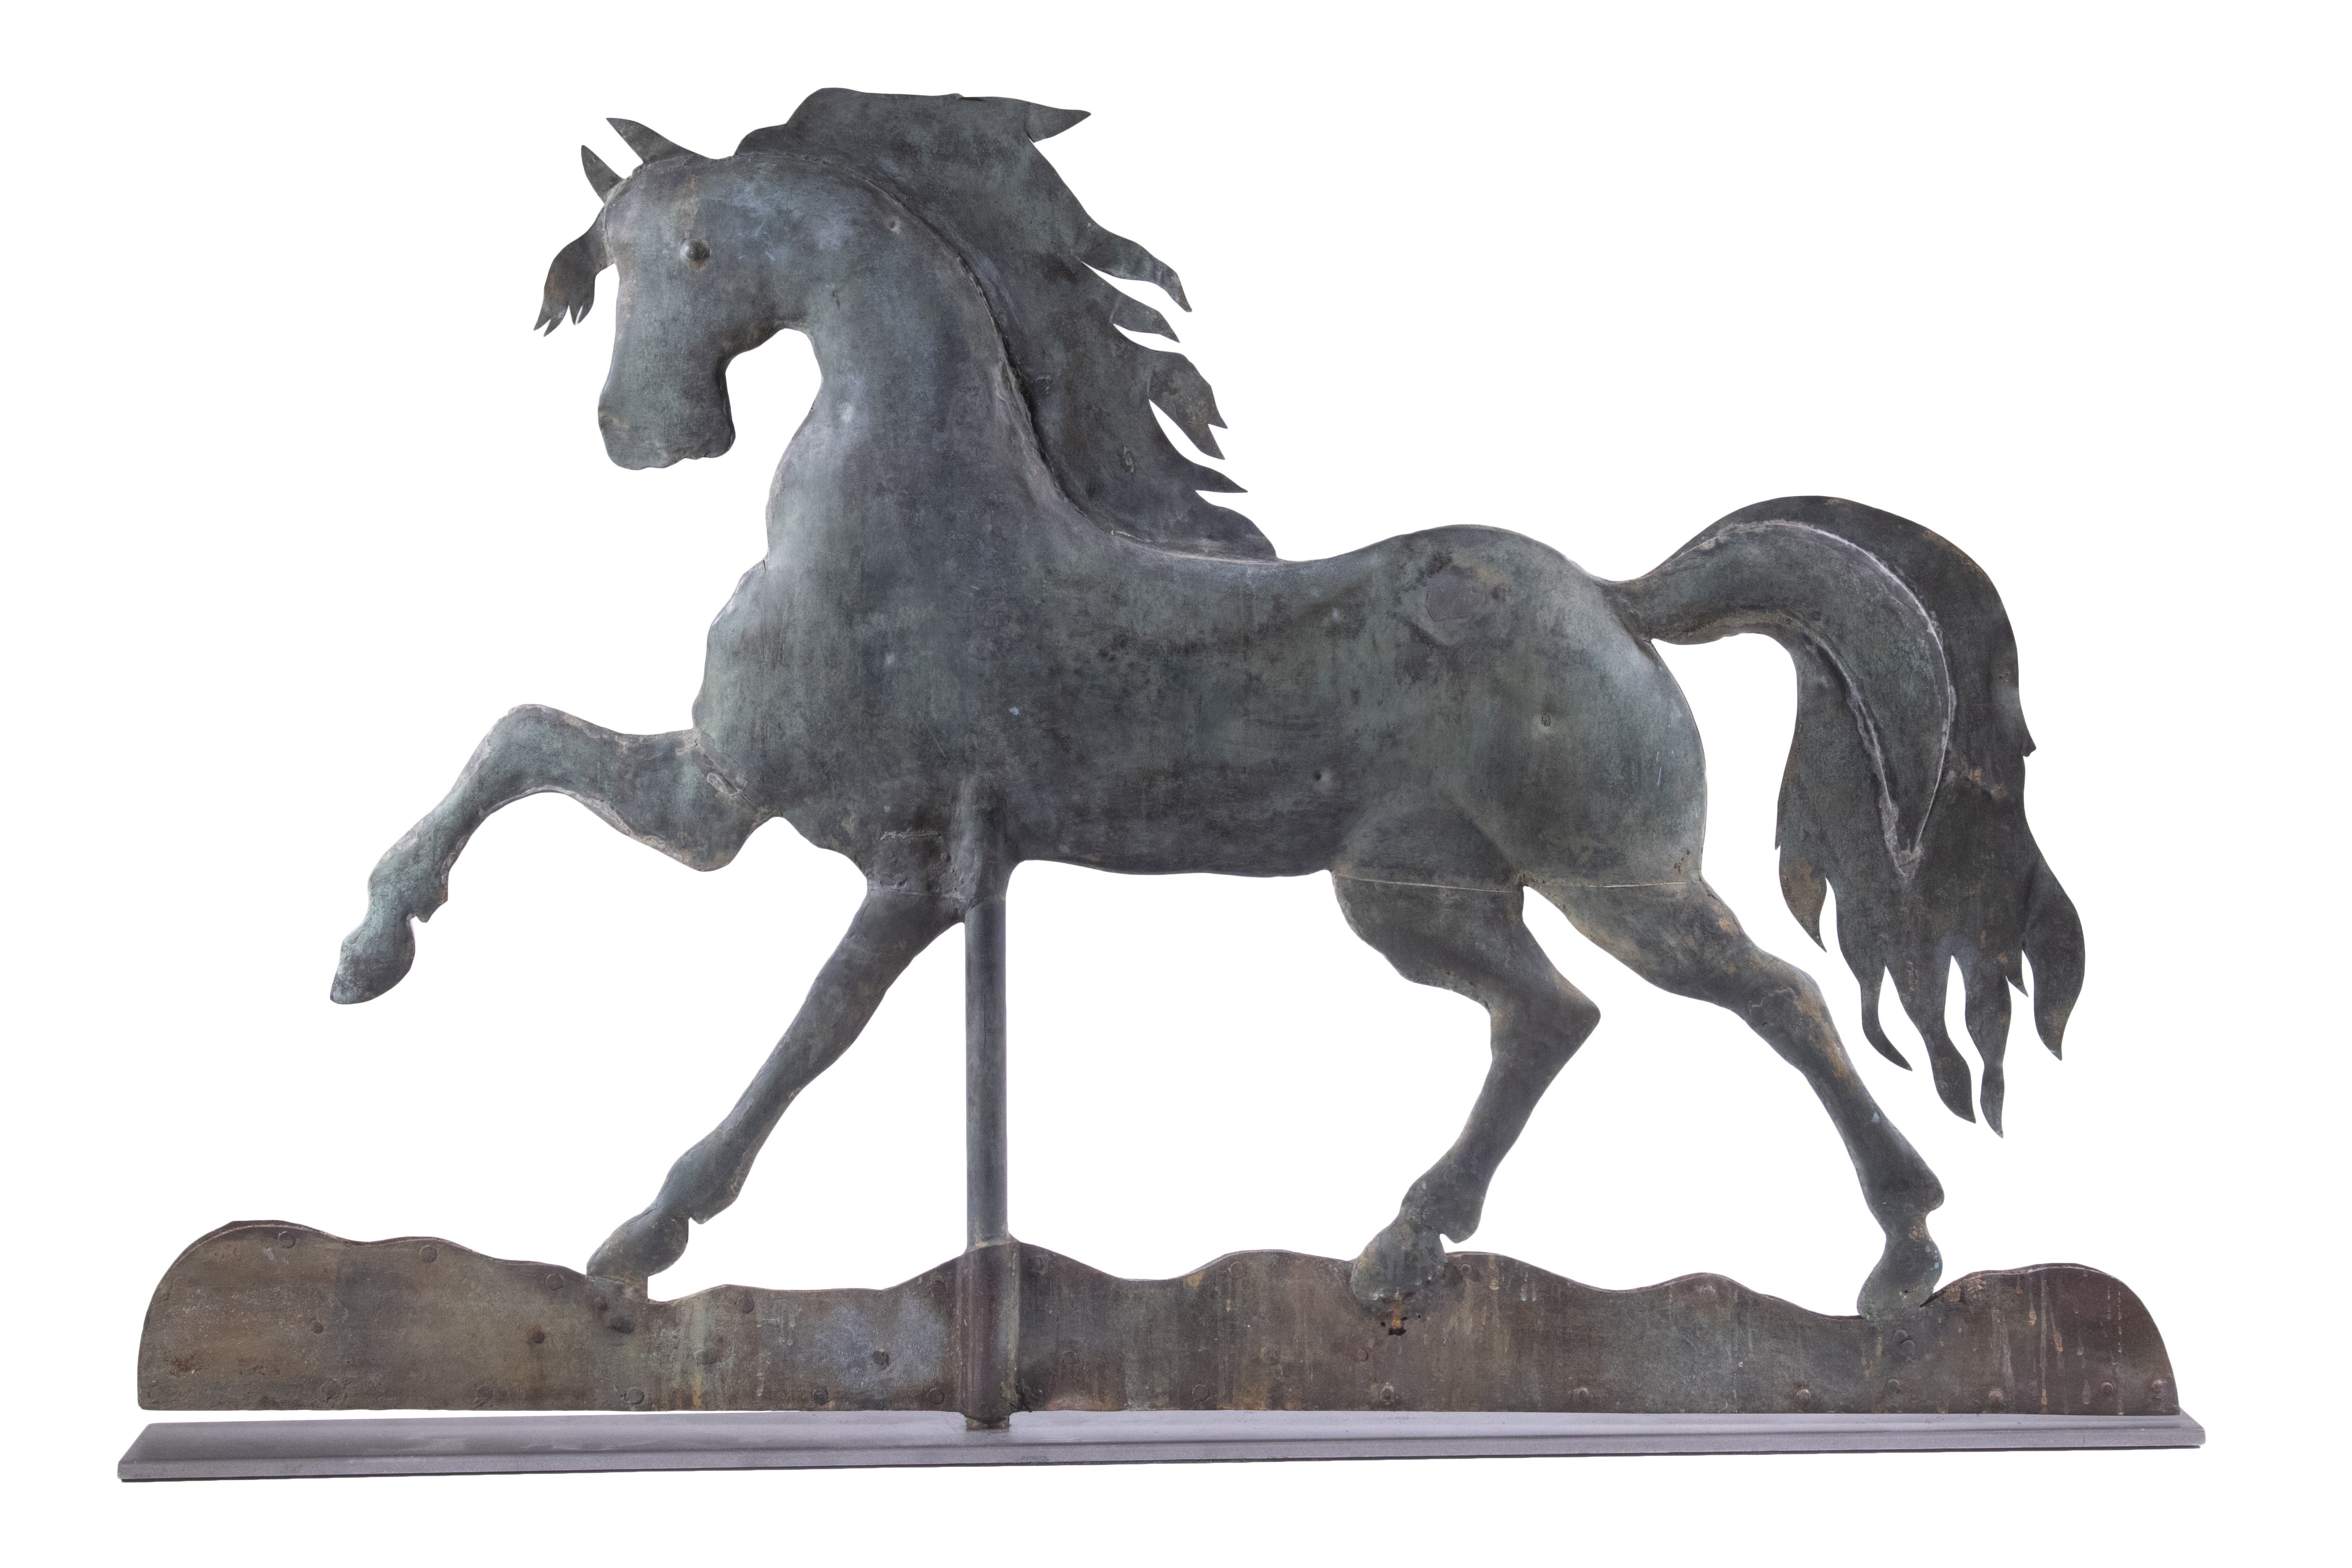 Circa-1860 prancing horse weathervane by Jewell, est. $8,000-$12,000